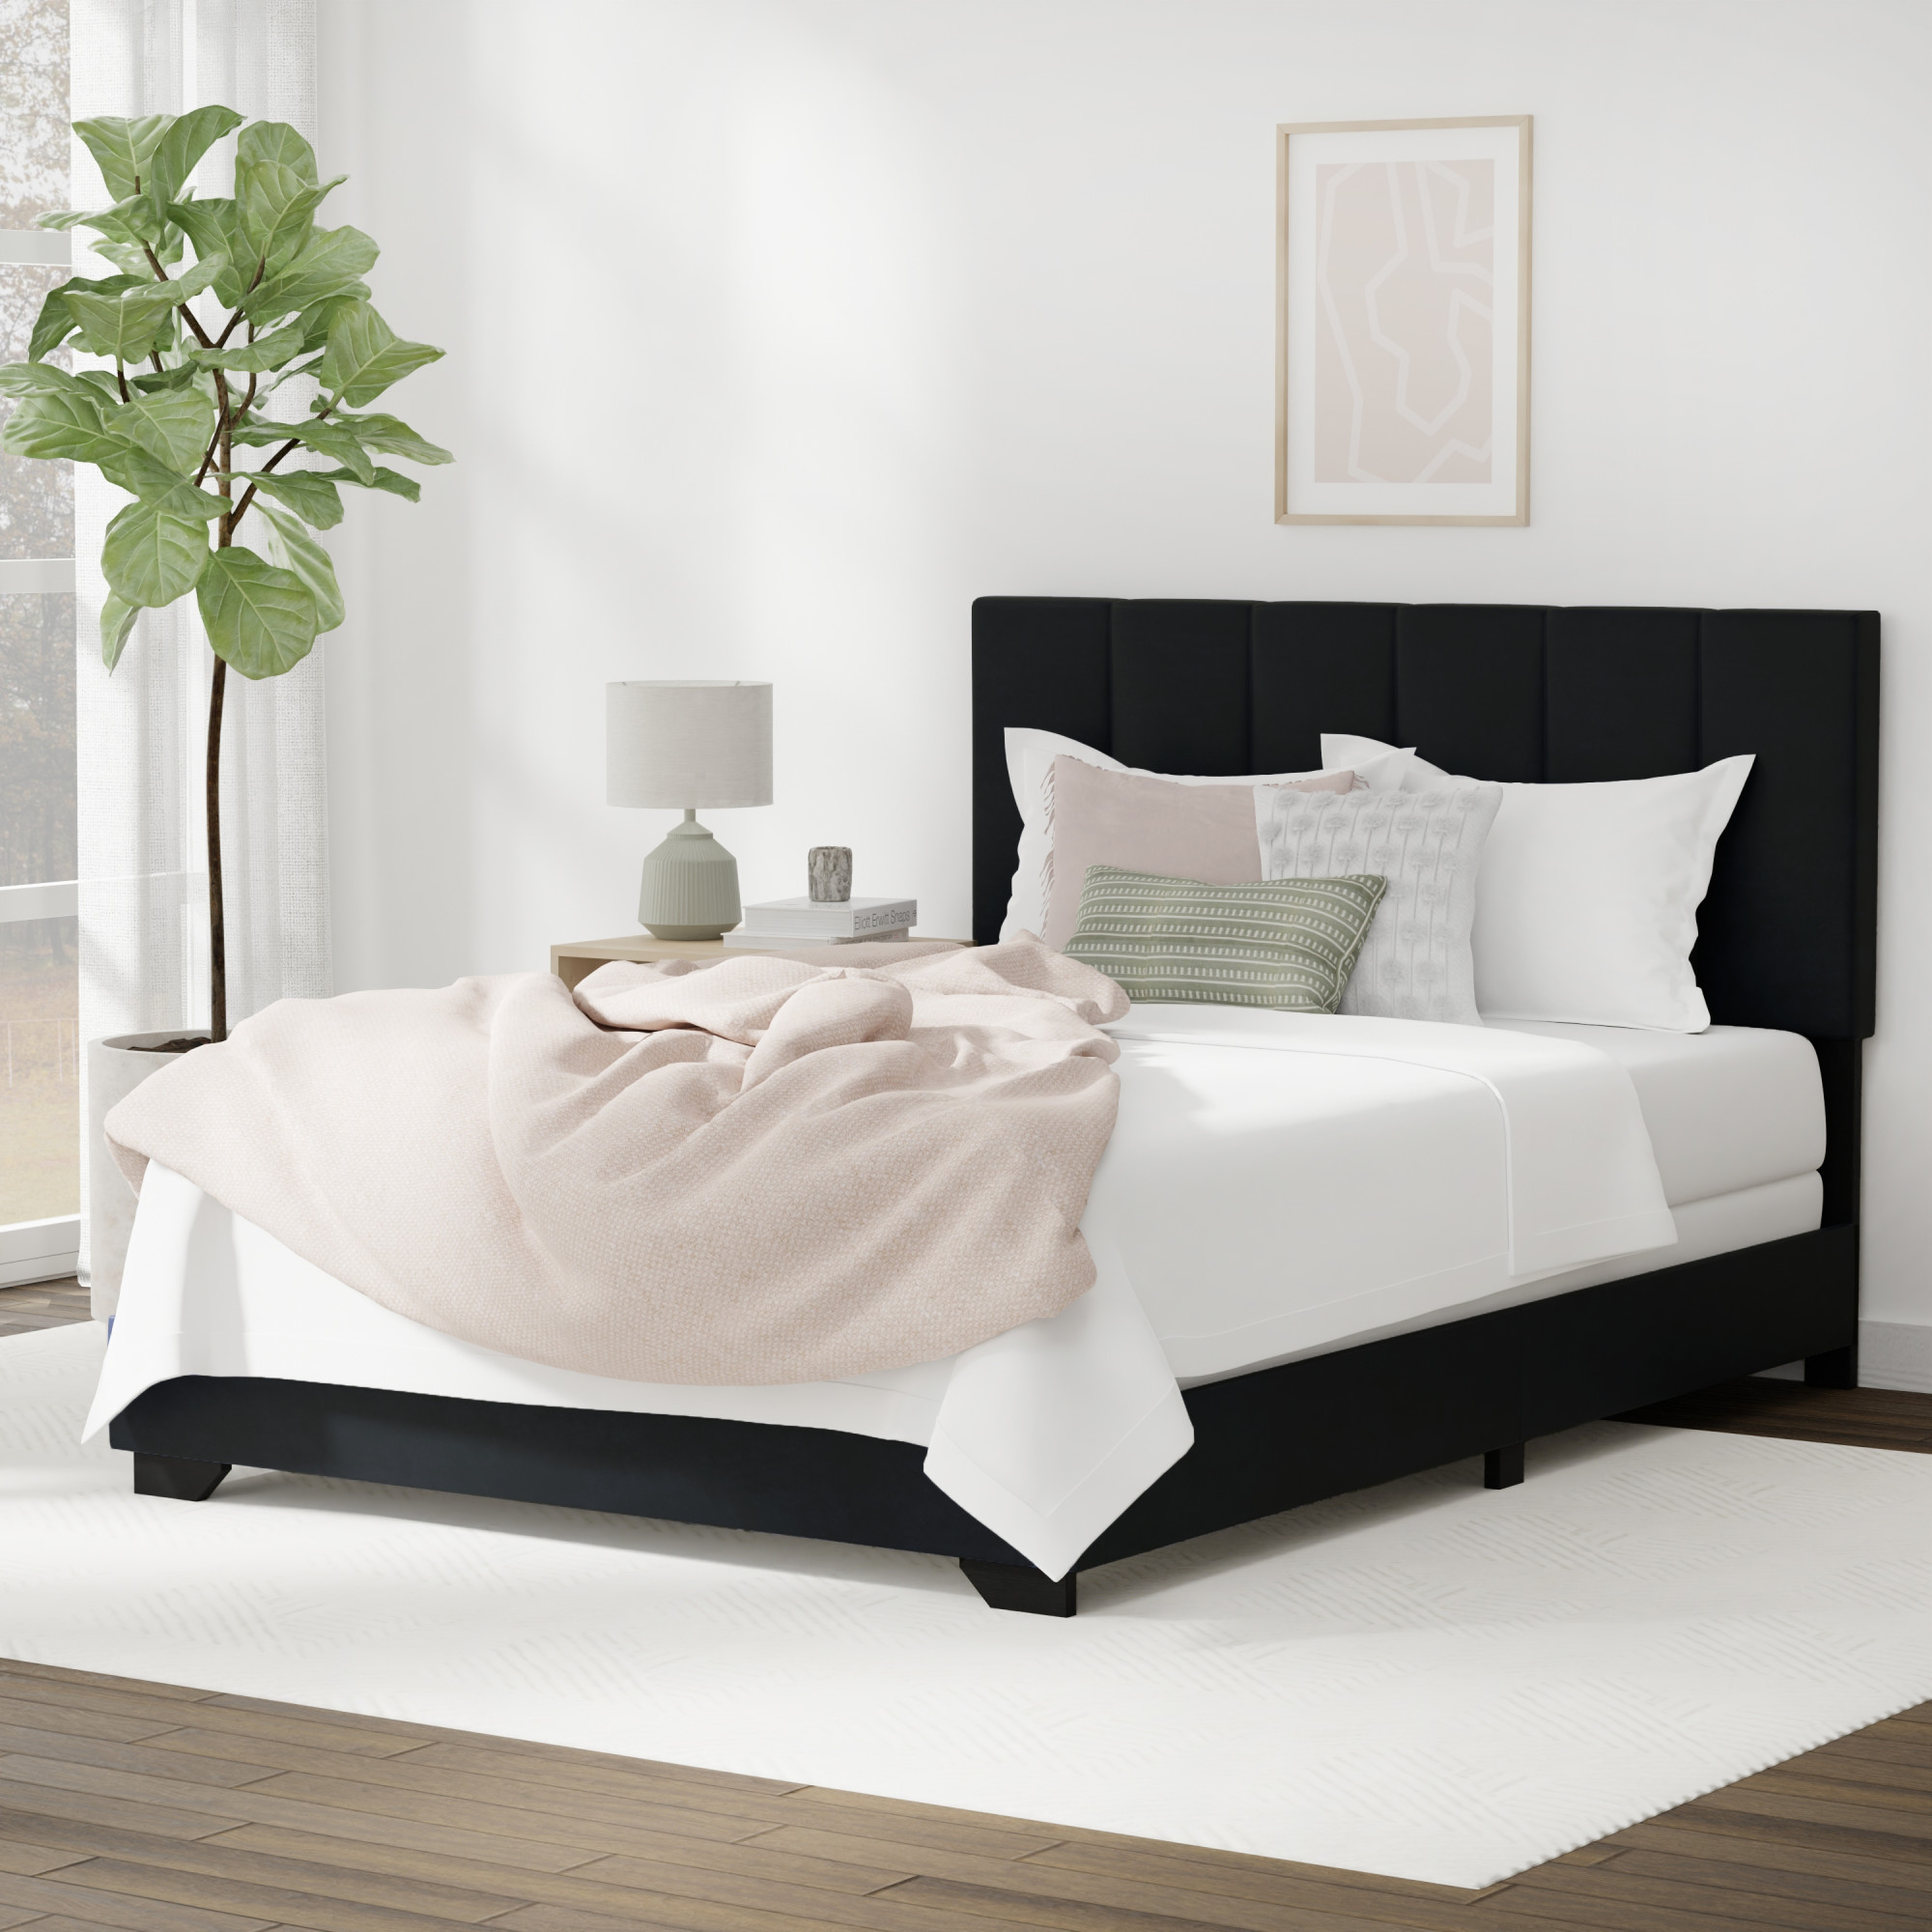 Reece Channel Stitched Upholstered Full Bed, Black, by Hillsdale Living Essentials - image 5 of 17